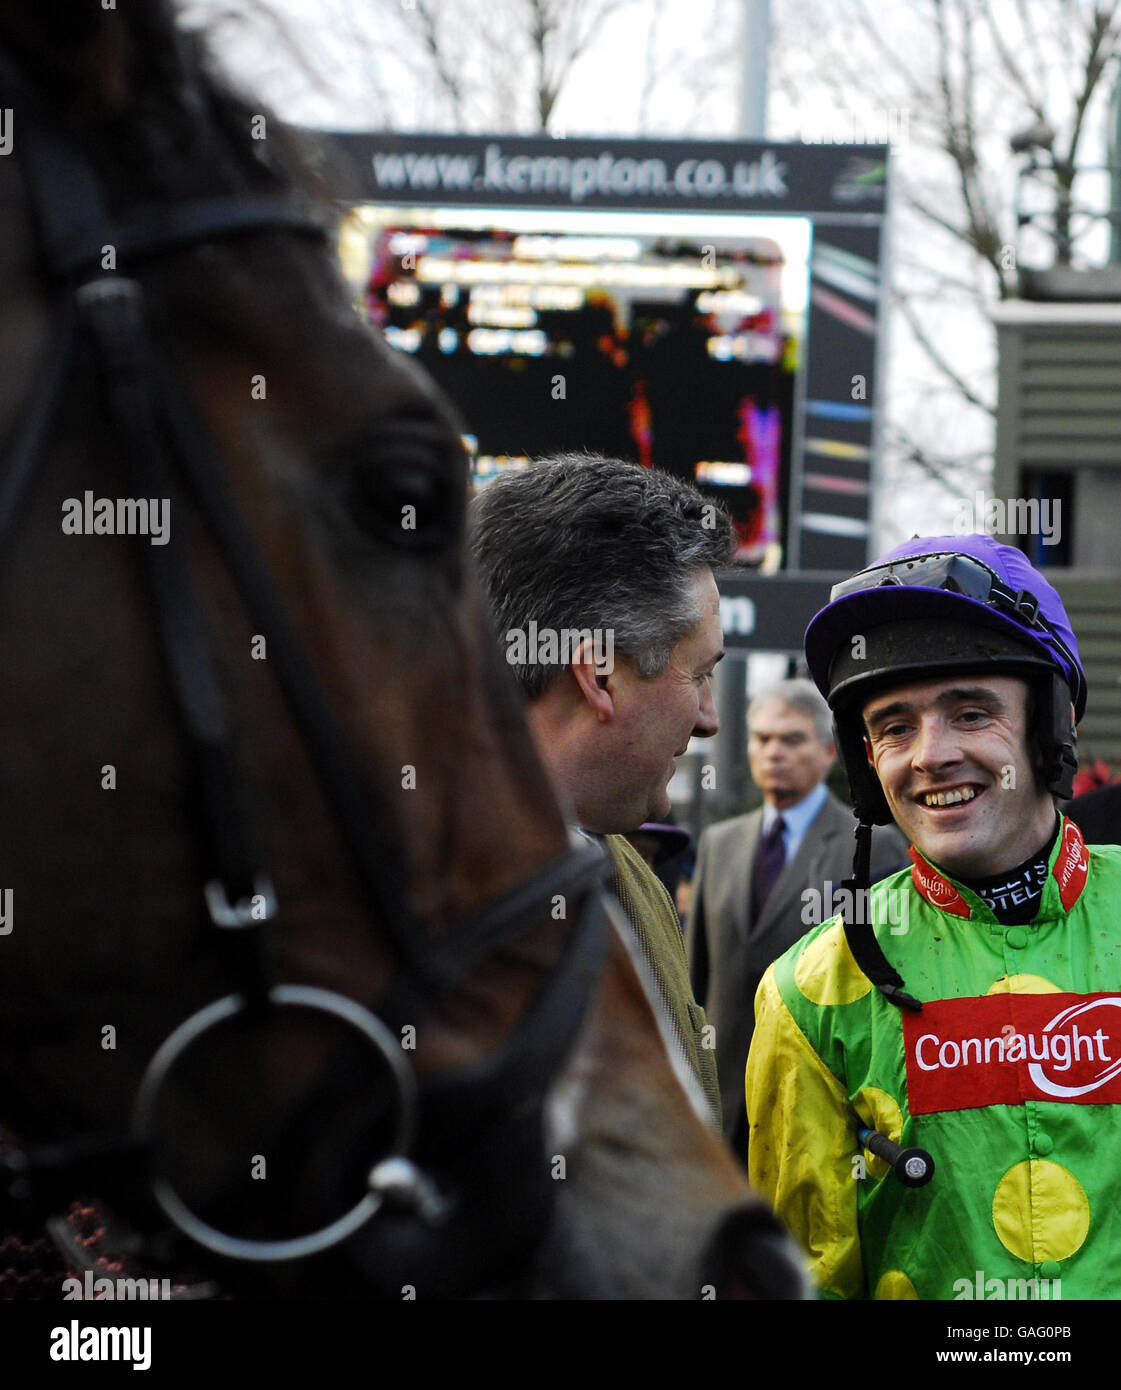 Kauto Star looks on as trainer Paul Nicholls talks to jockey Ruby Walsh after victory in The Stan James King Georg VI Chase at Kempton Park Racecourse. Stock Photo